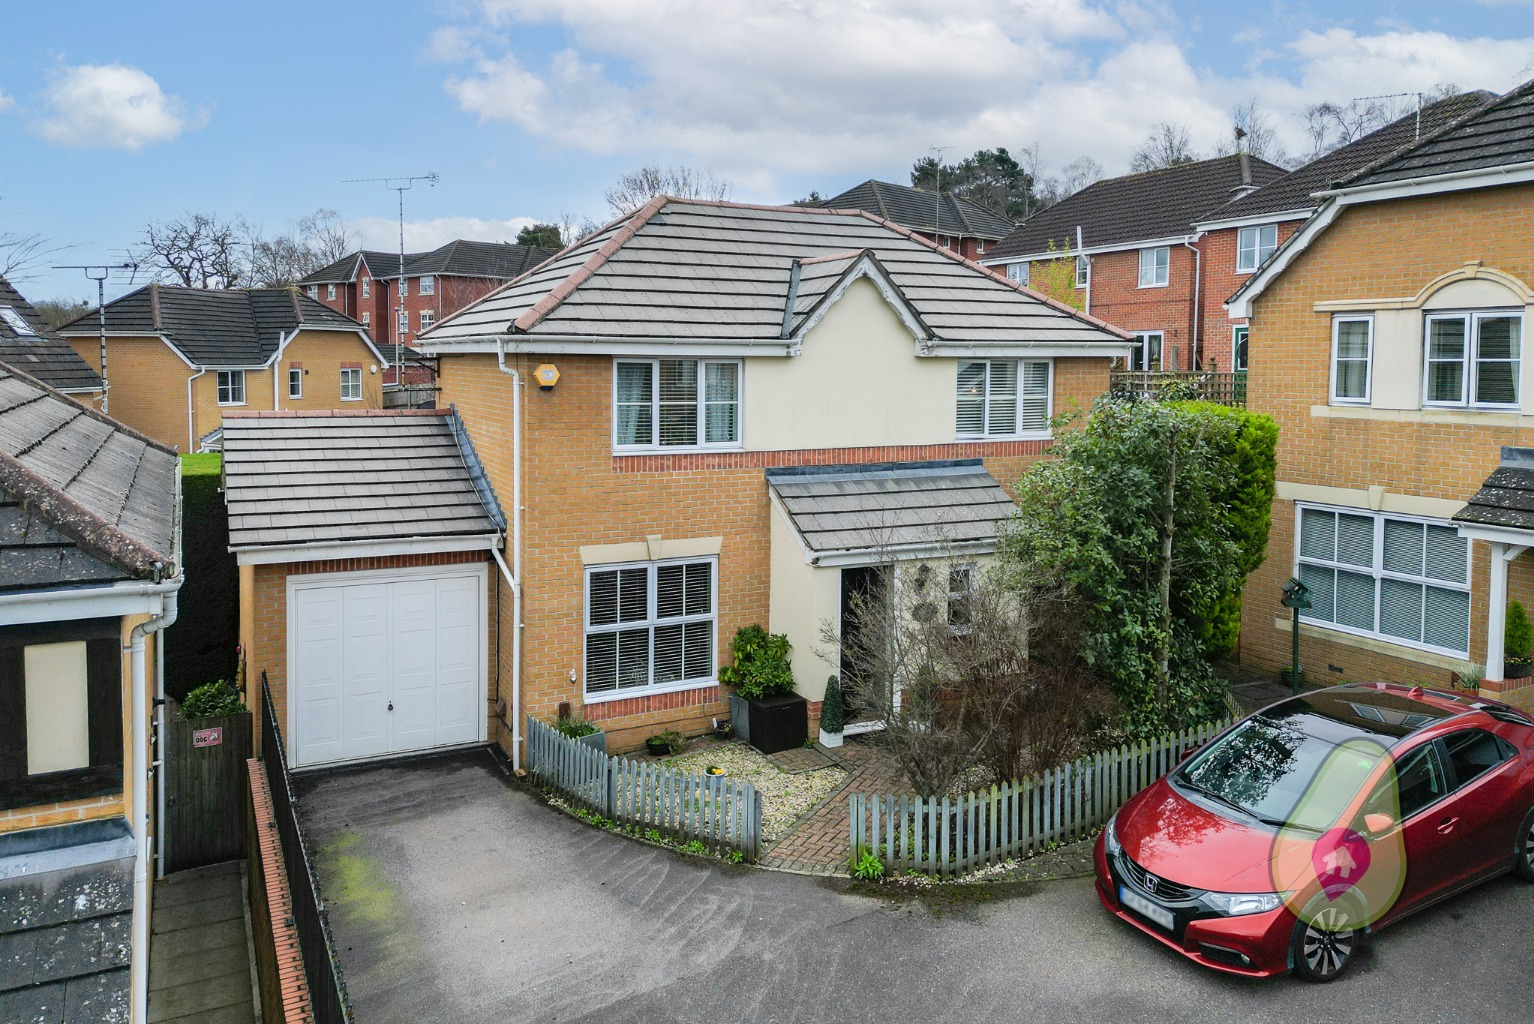 3 bed detached house for sale in Babbage Way, Bracknell - Property Image 1